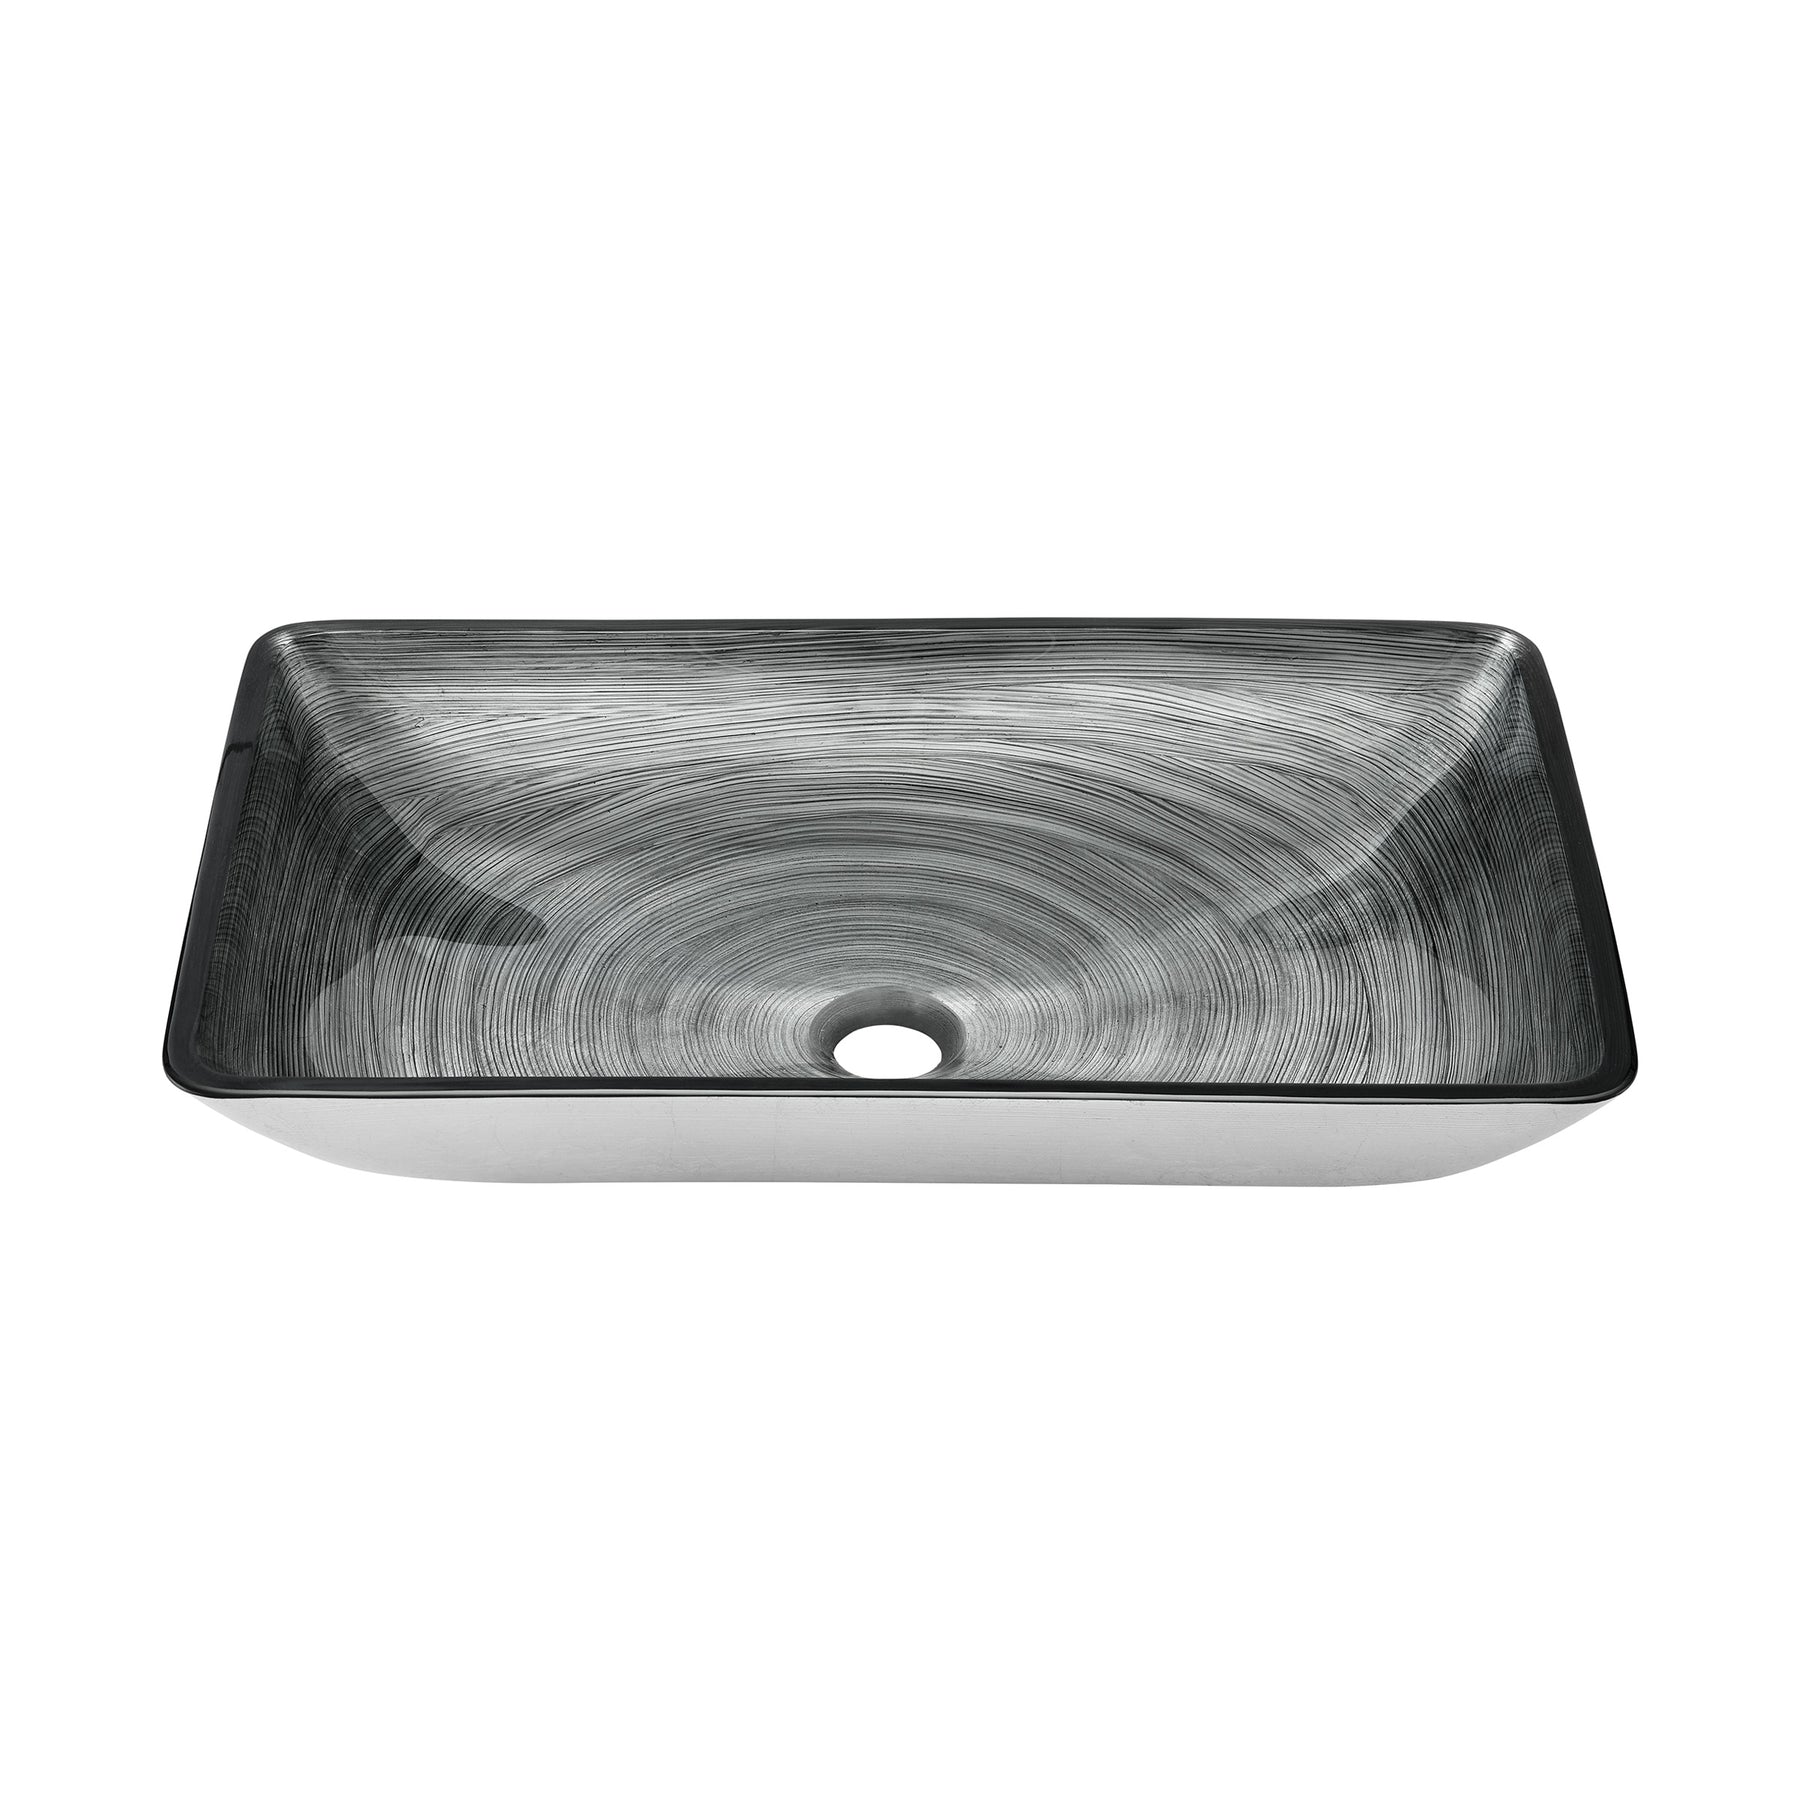 Swiss Madison Cascade Rectangular Glass Vessel Sink with Faucet - SM-VSF29